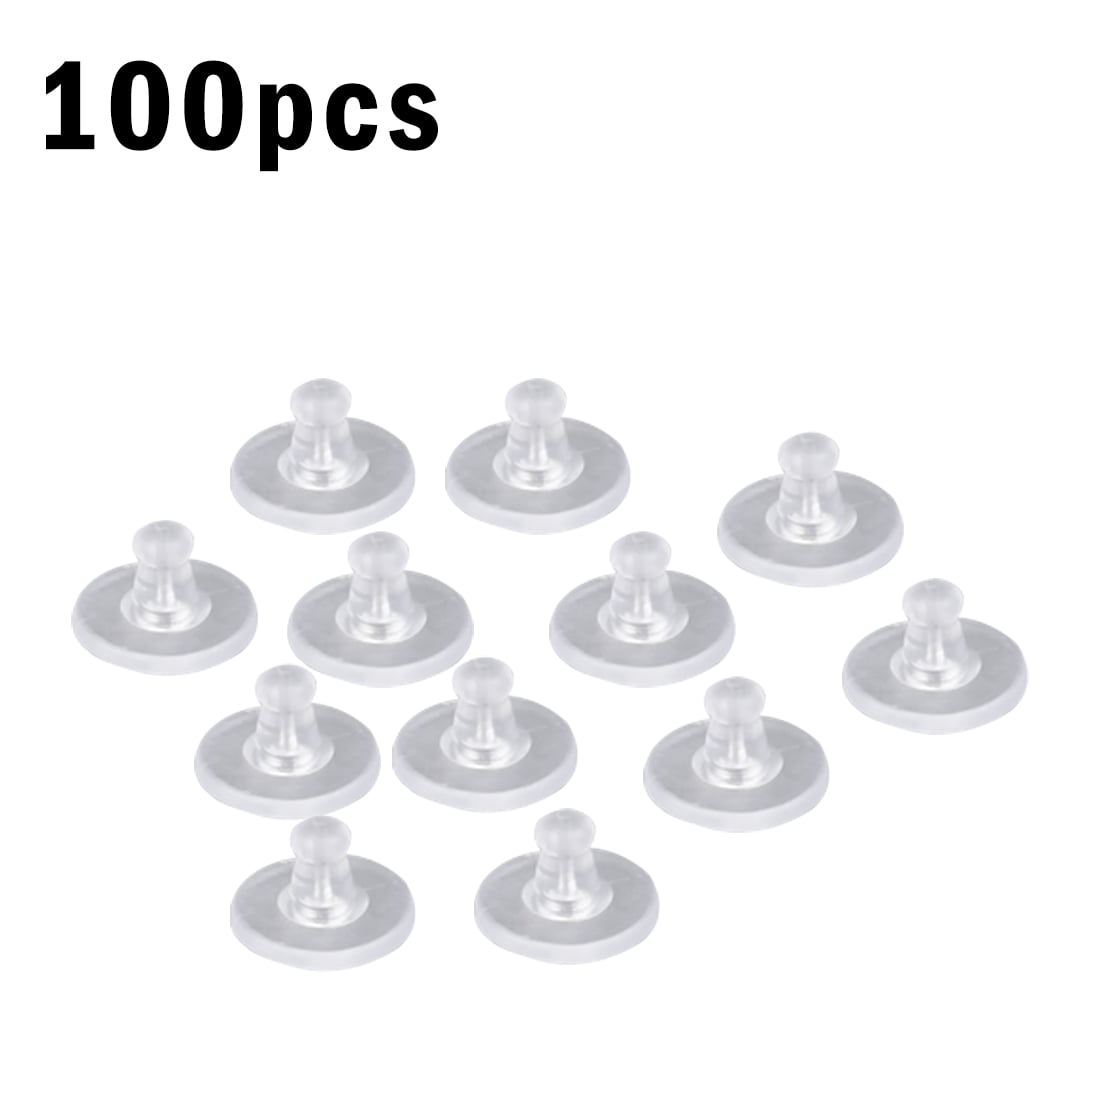 Wholesale 1000 PCS 4MM Rubber Earring Back Stoppers Ear Post Nuts Jewelry Making 